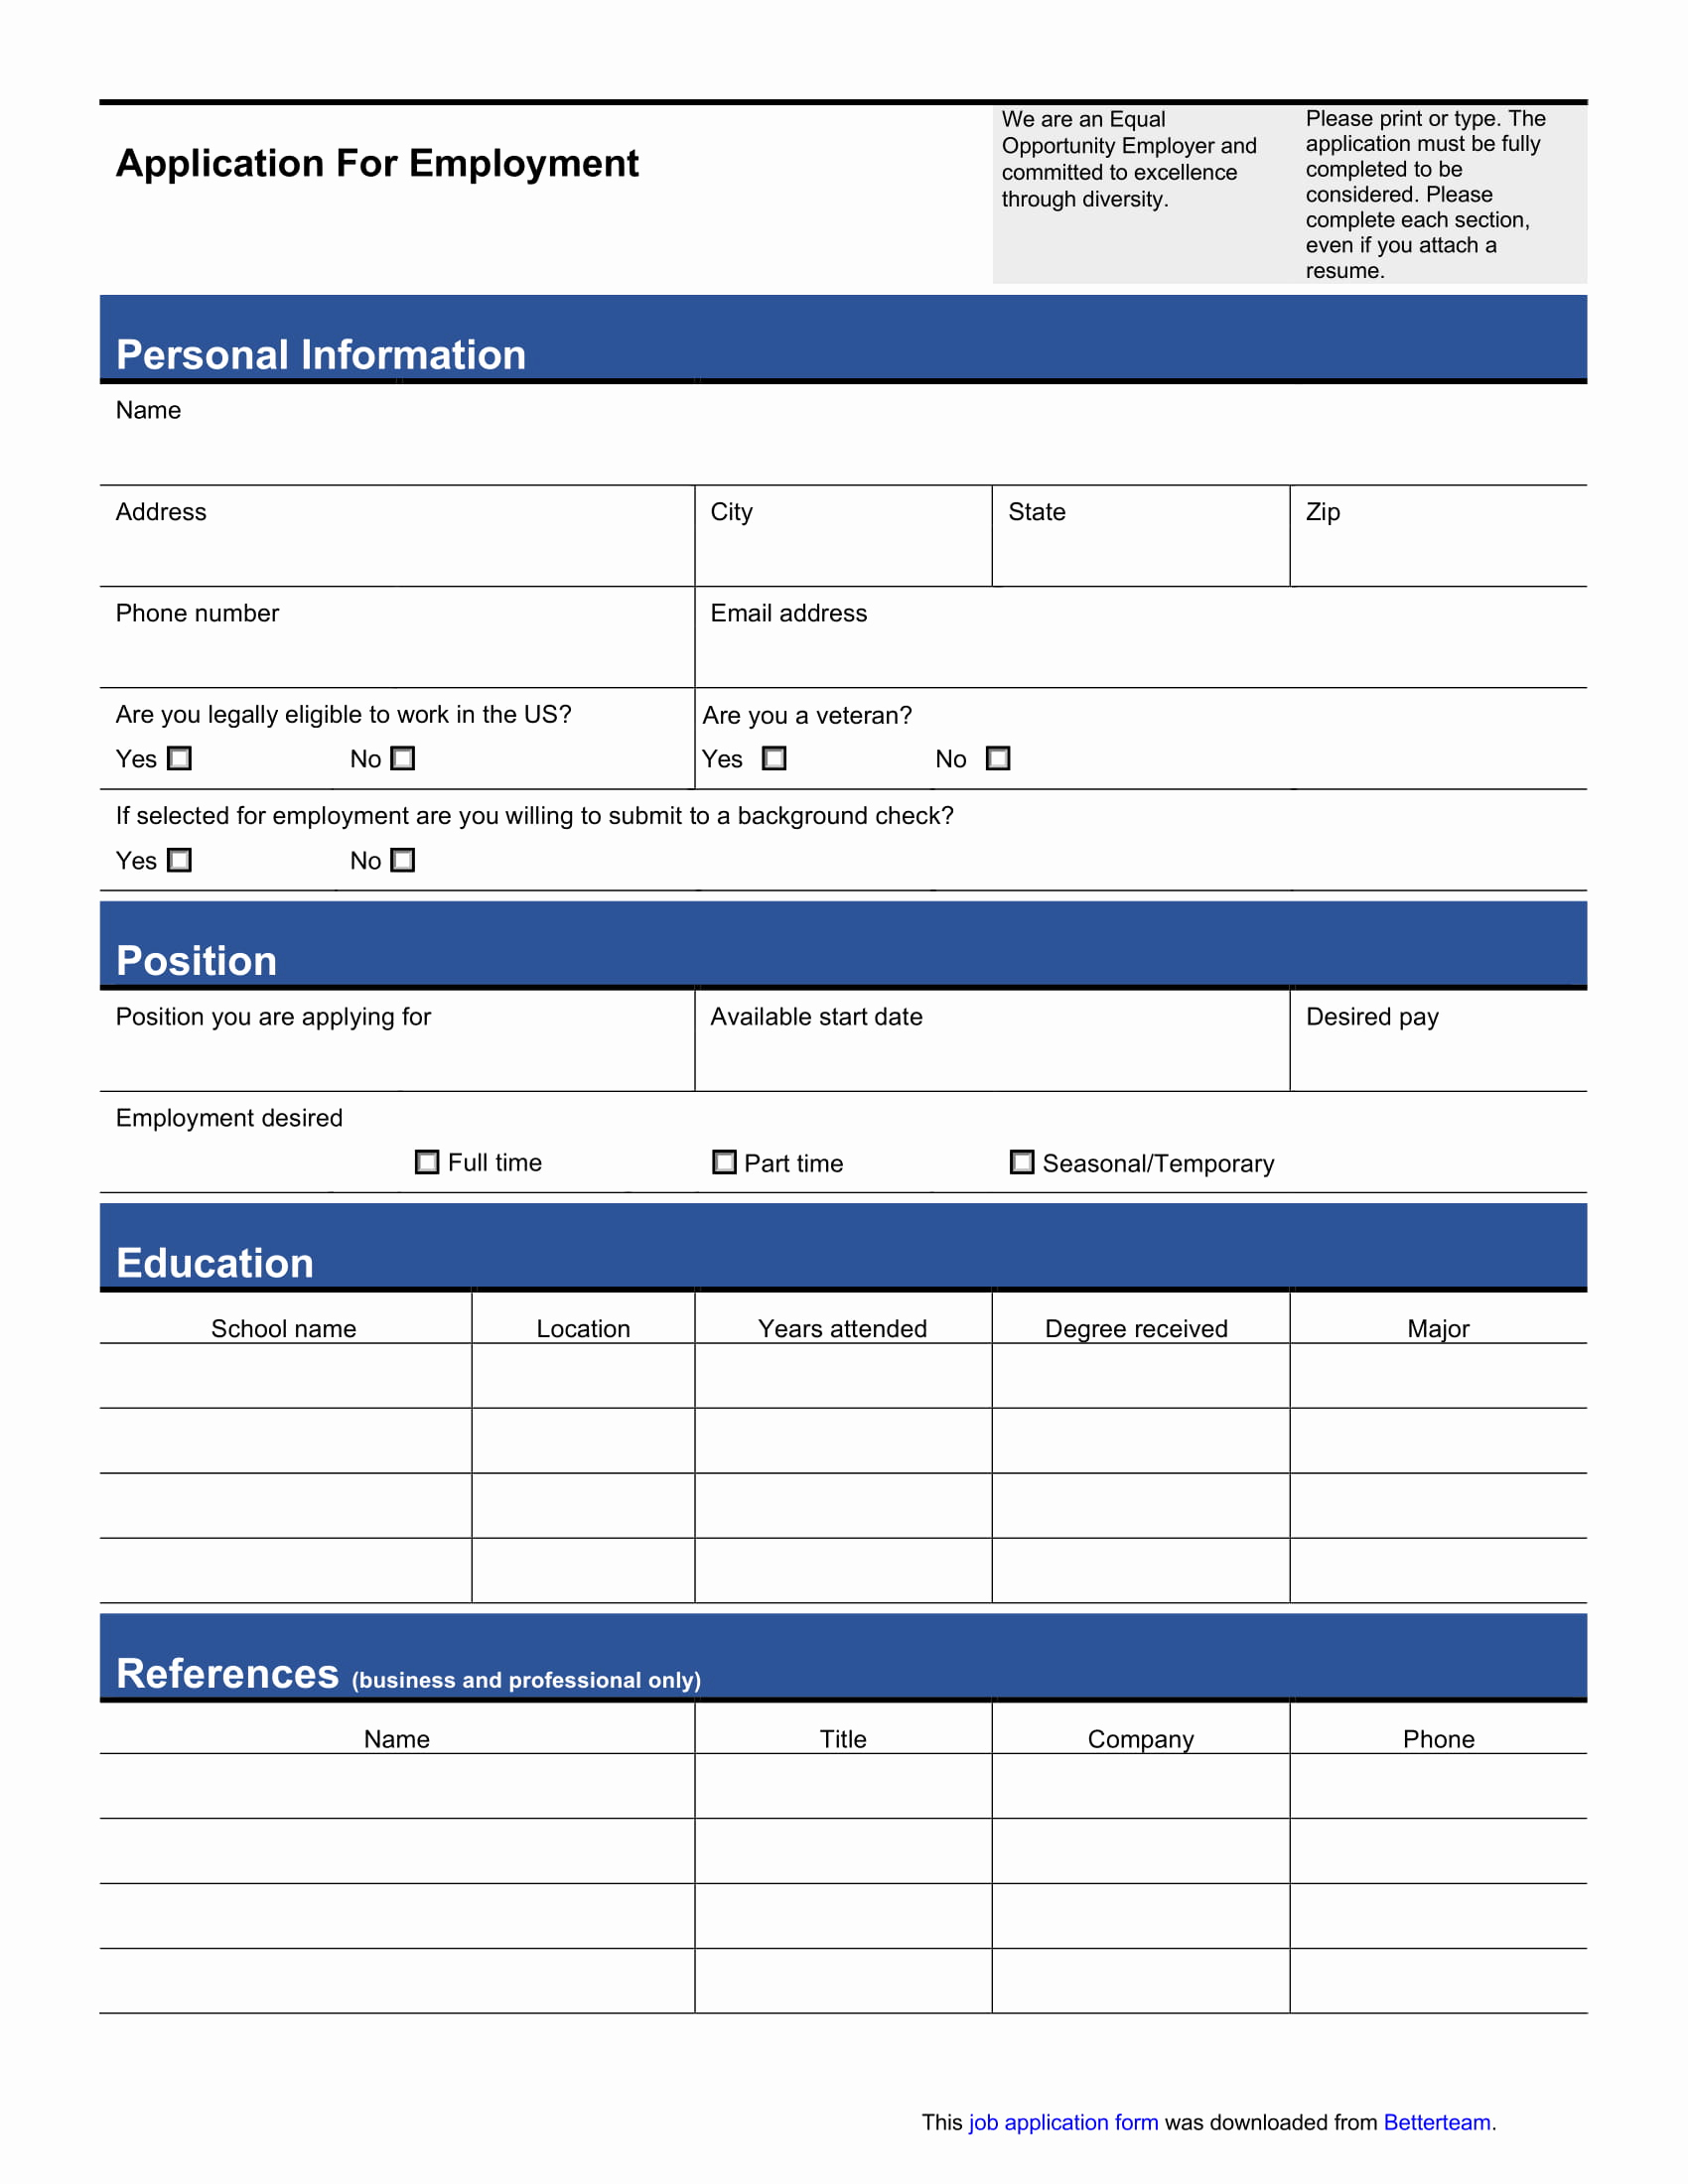 Jobs Application form Pdf Awesome 14 Employment Application form Examples Pdf